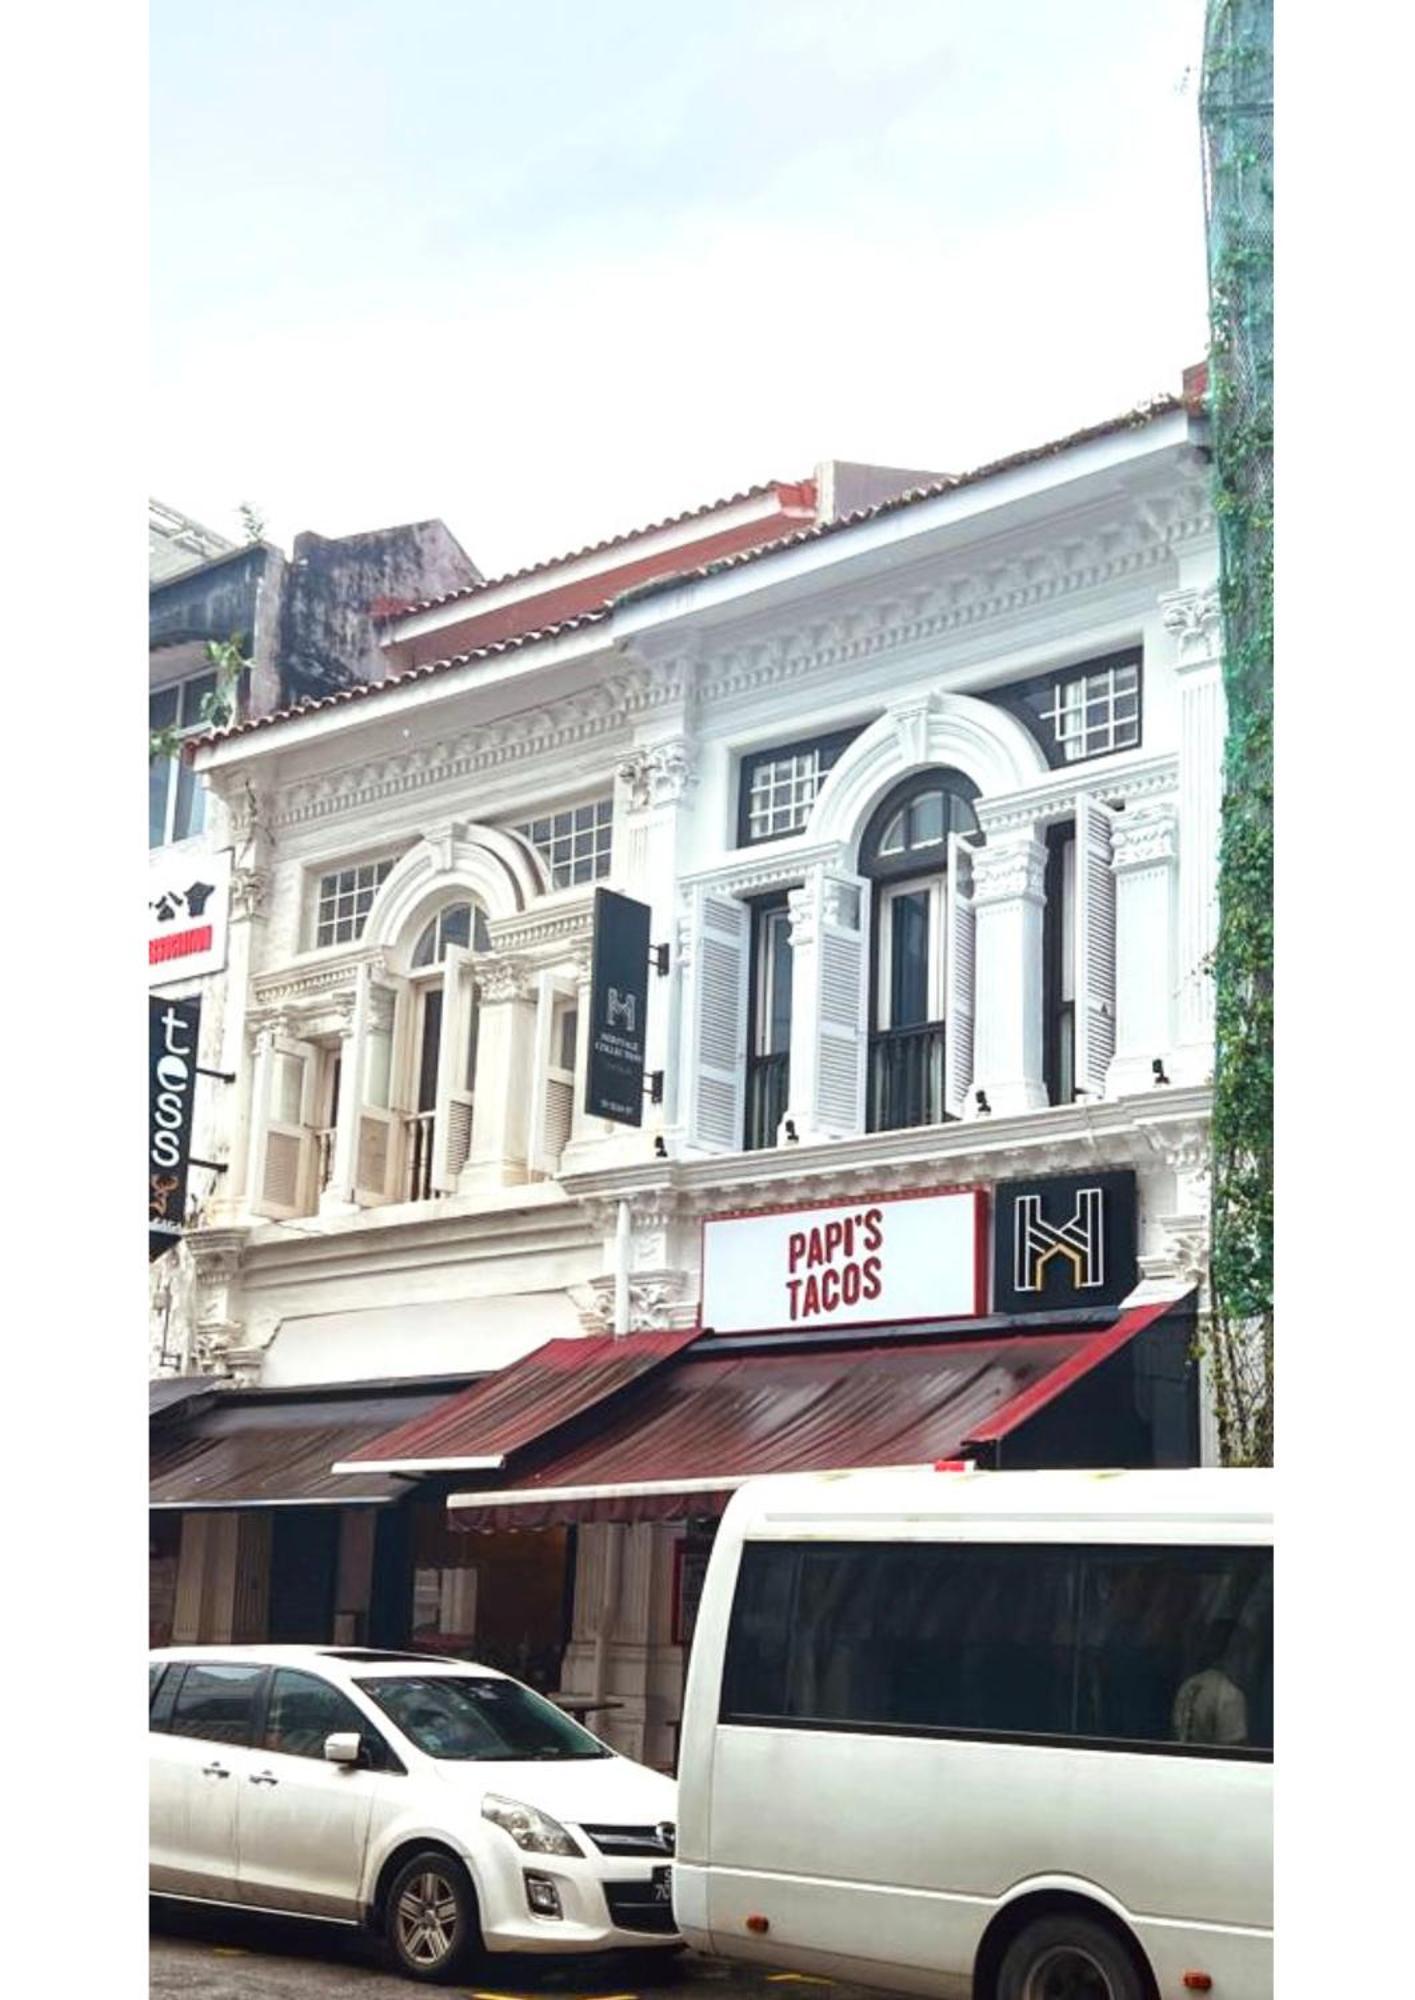 Heritage Collection On Seah - A Digital Hotel Singapore Exterior foto